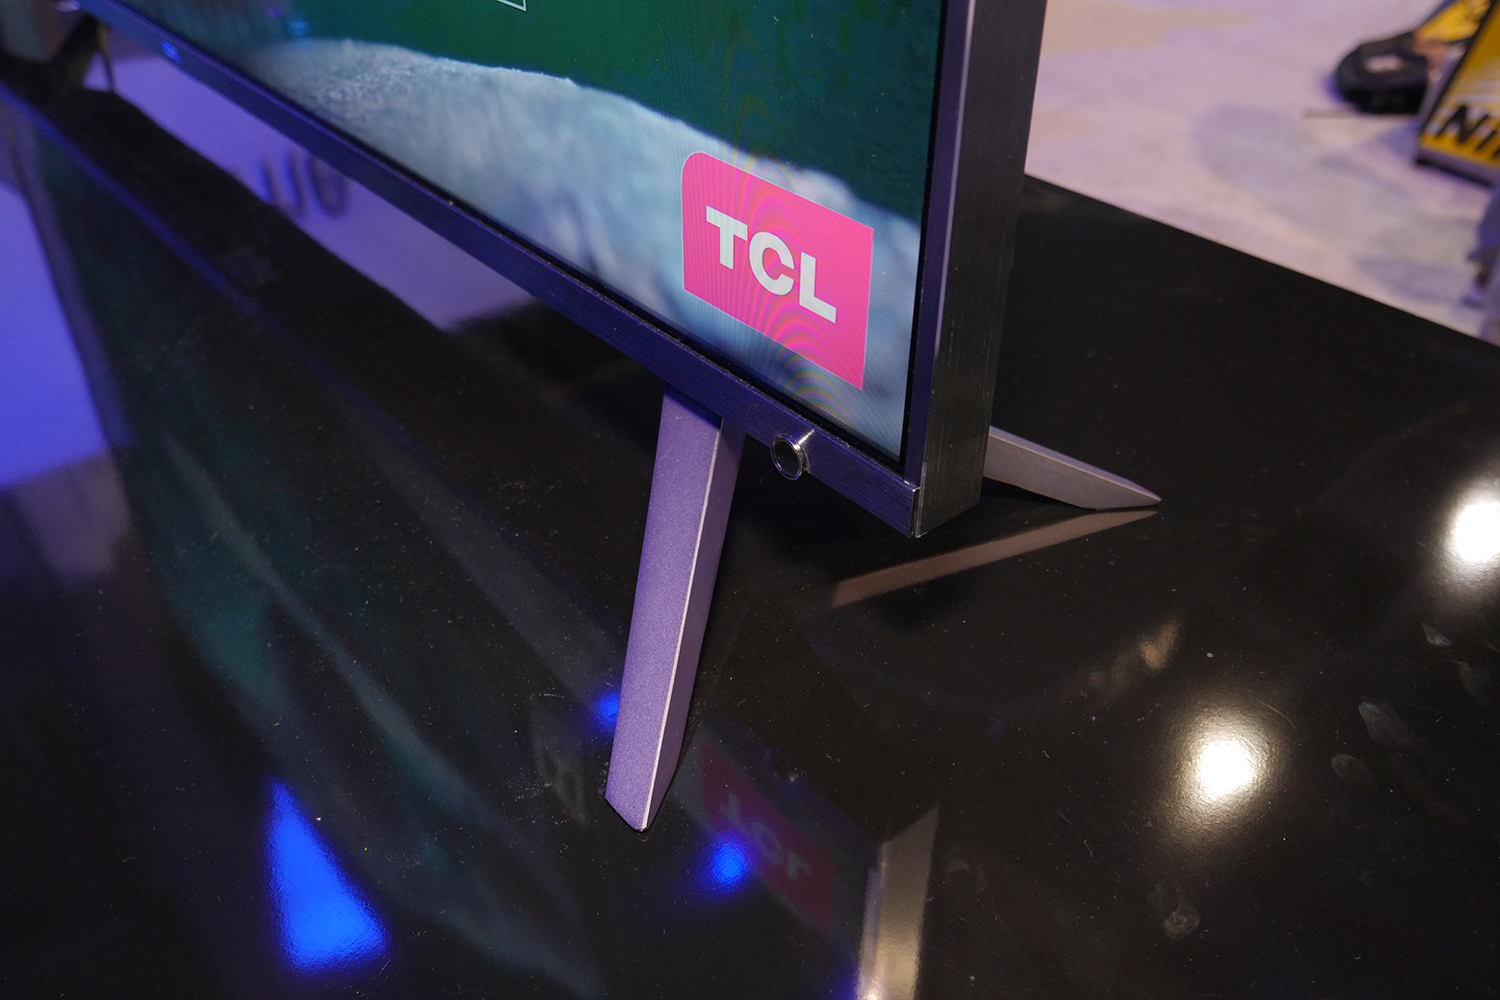 tcl 6 series 4k hdr led tv first look sleeper hit of 2018 ces2018 3